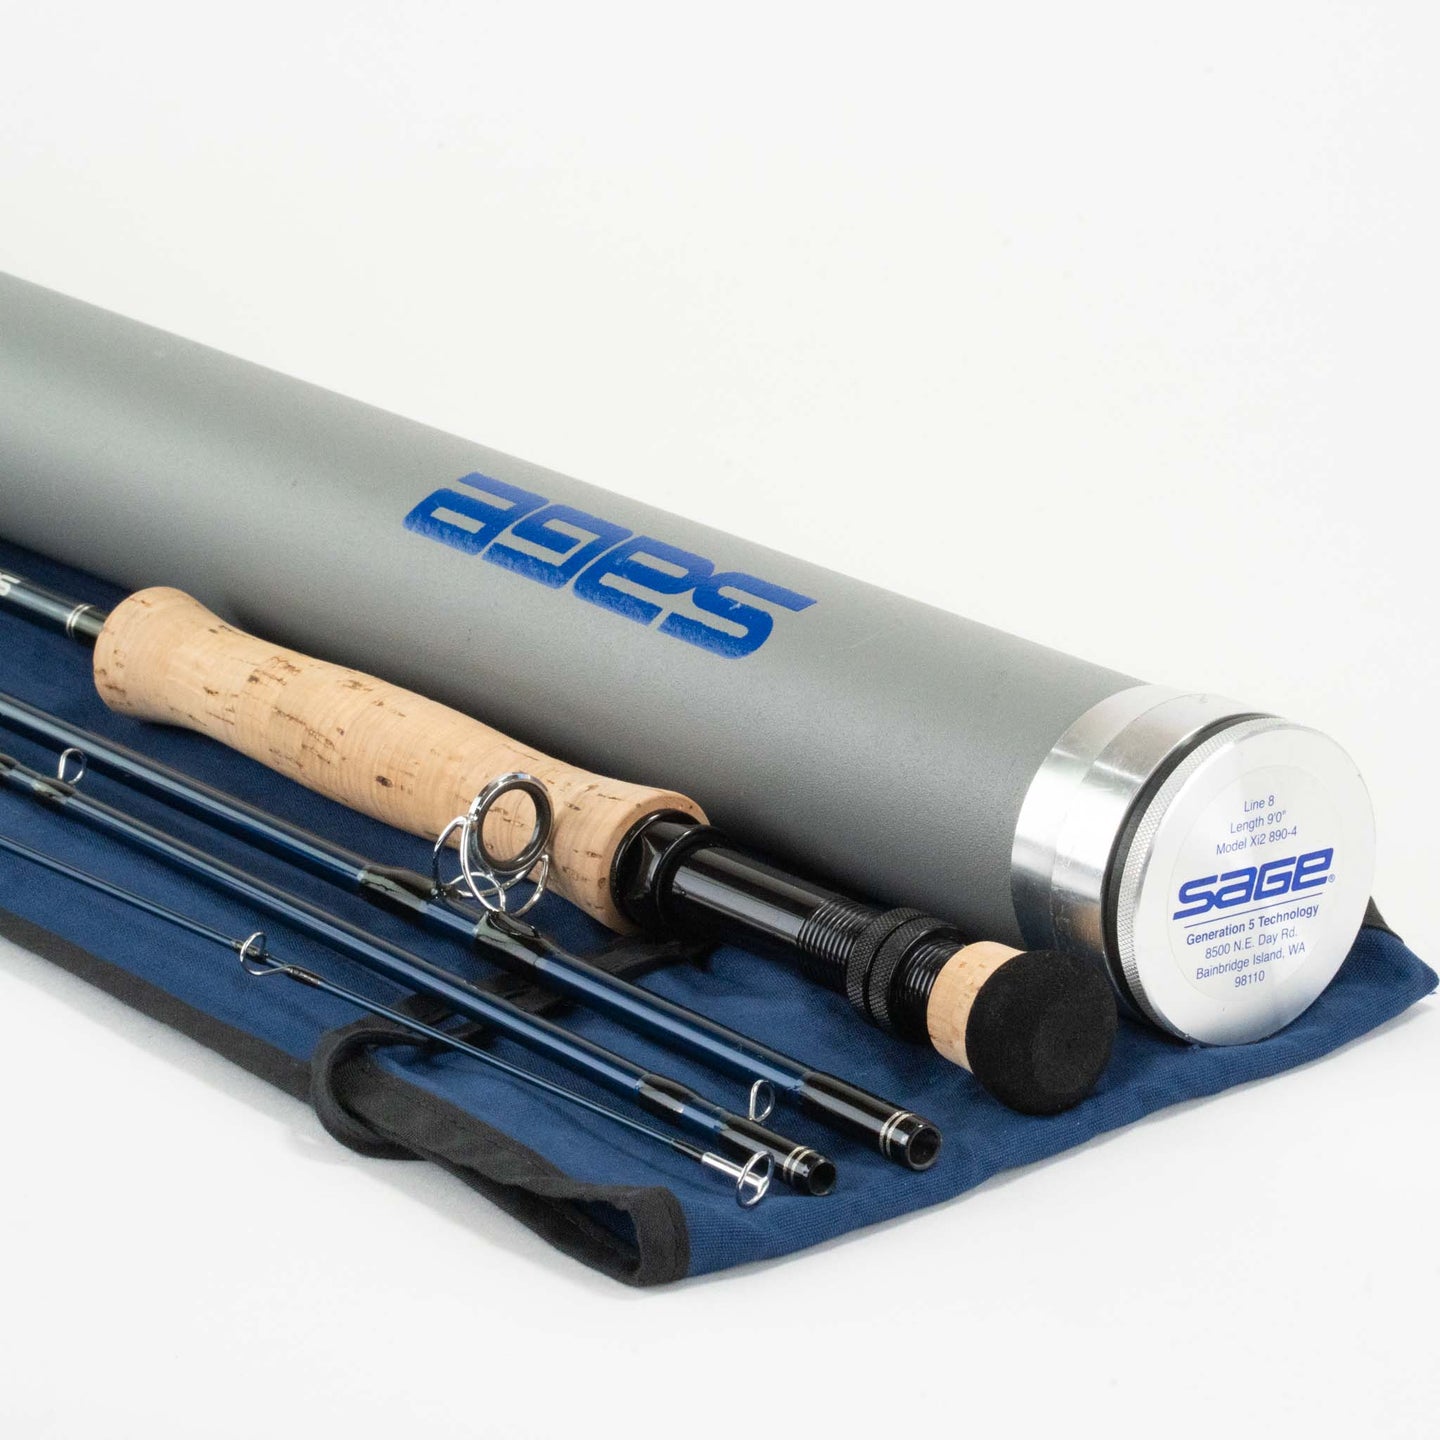 Sage Xi2 890-4 Fly Rod - 8wt 9ft 0in 4pc